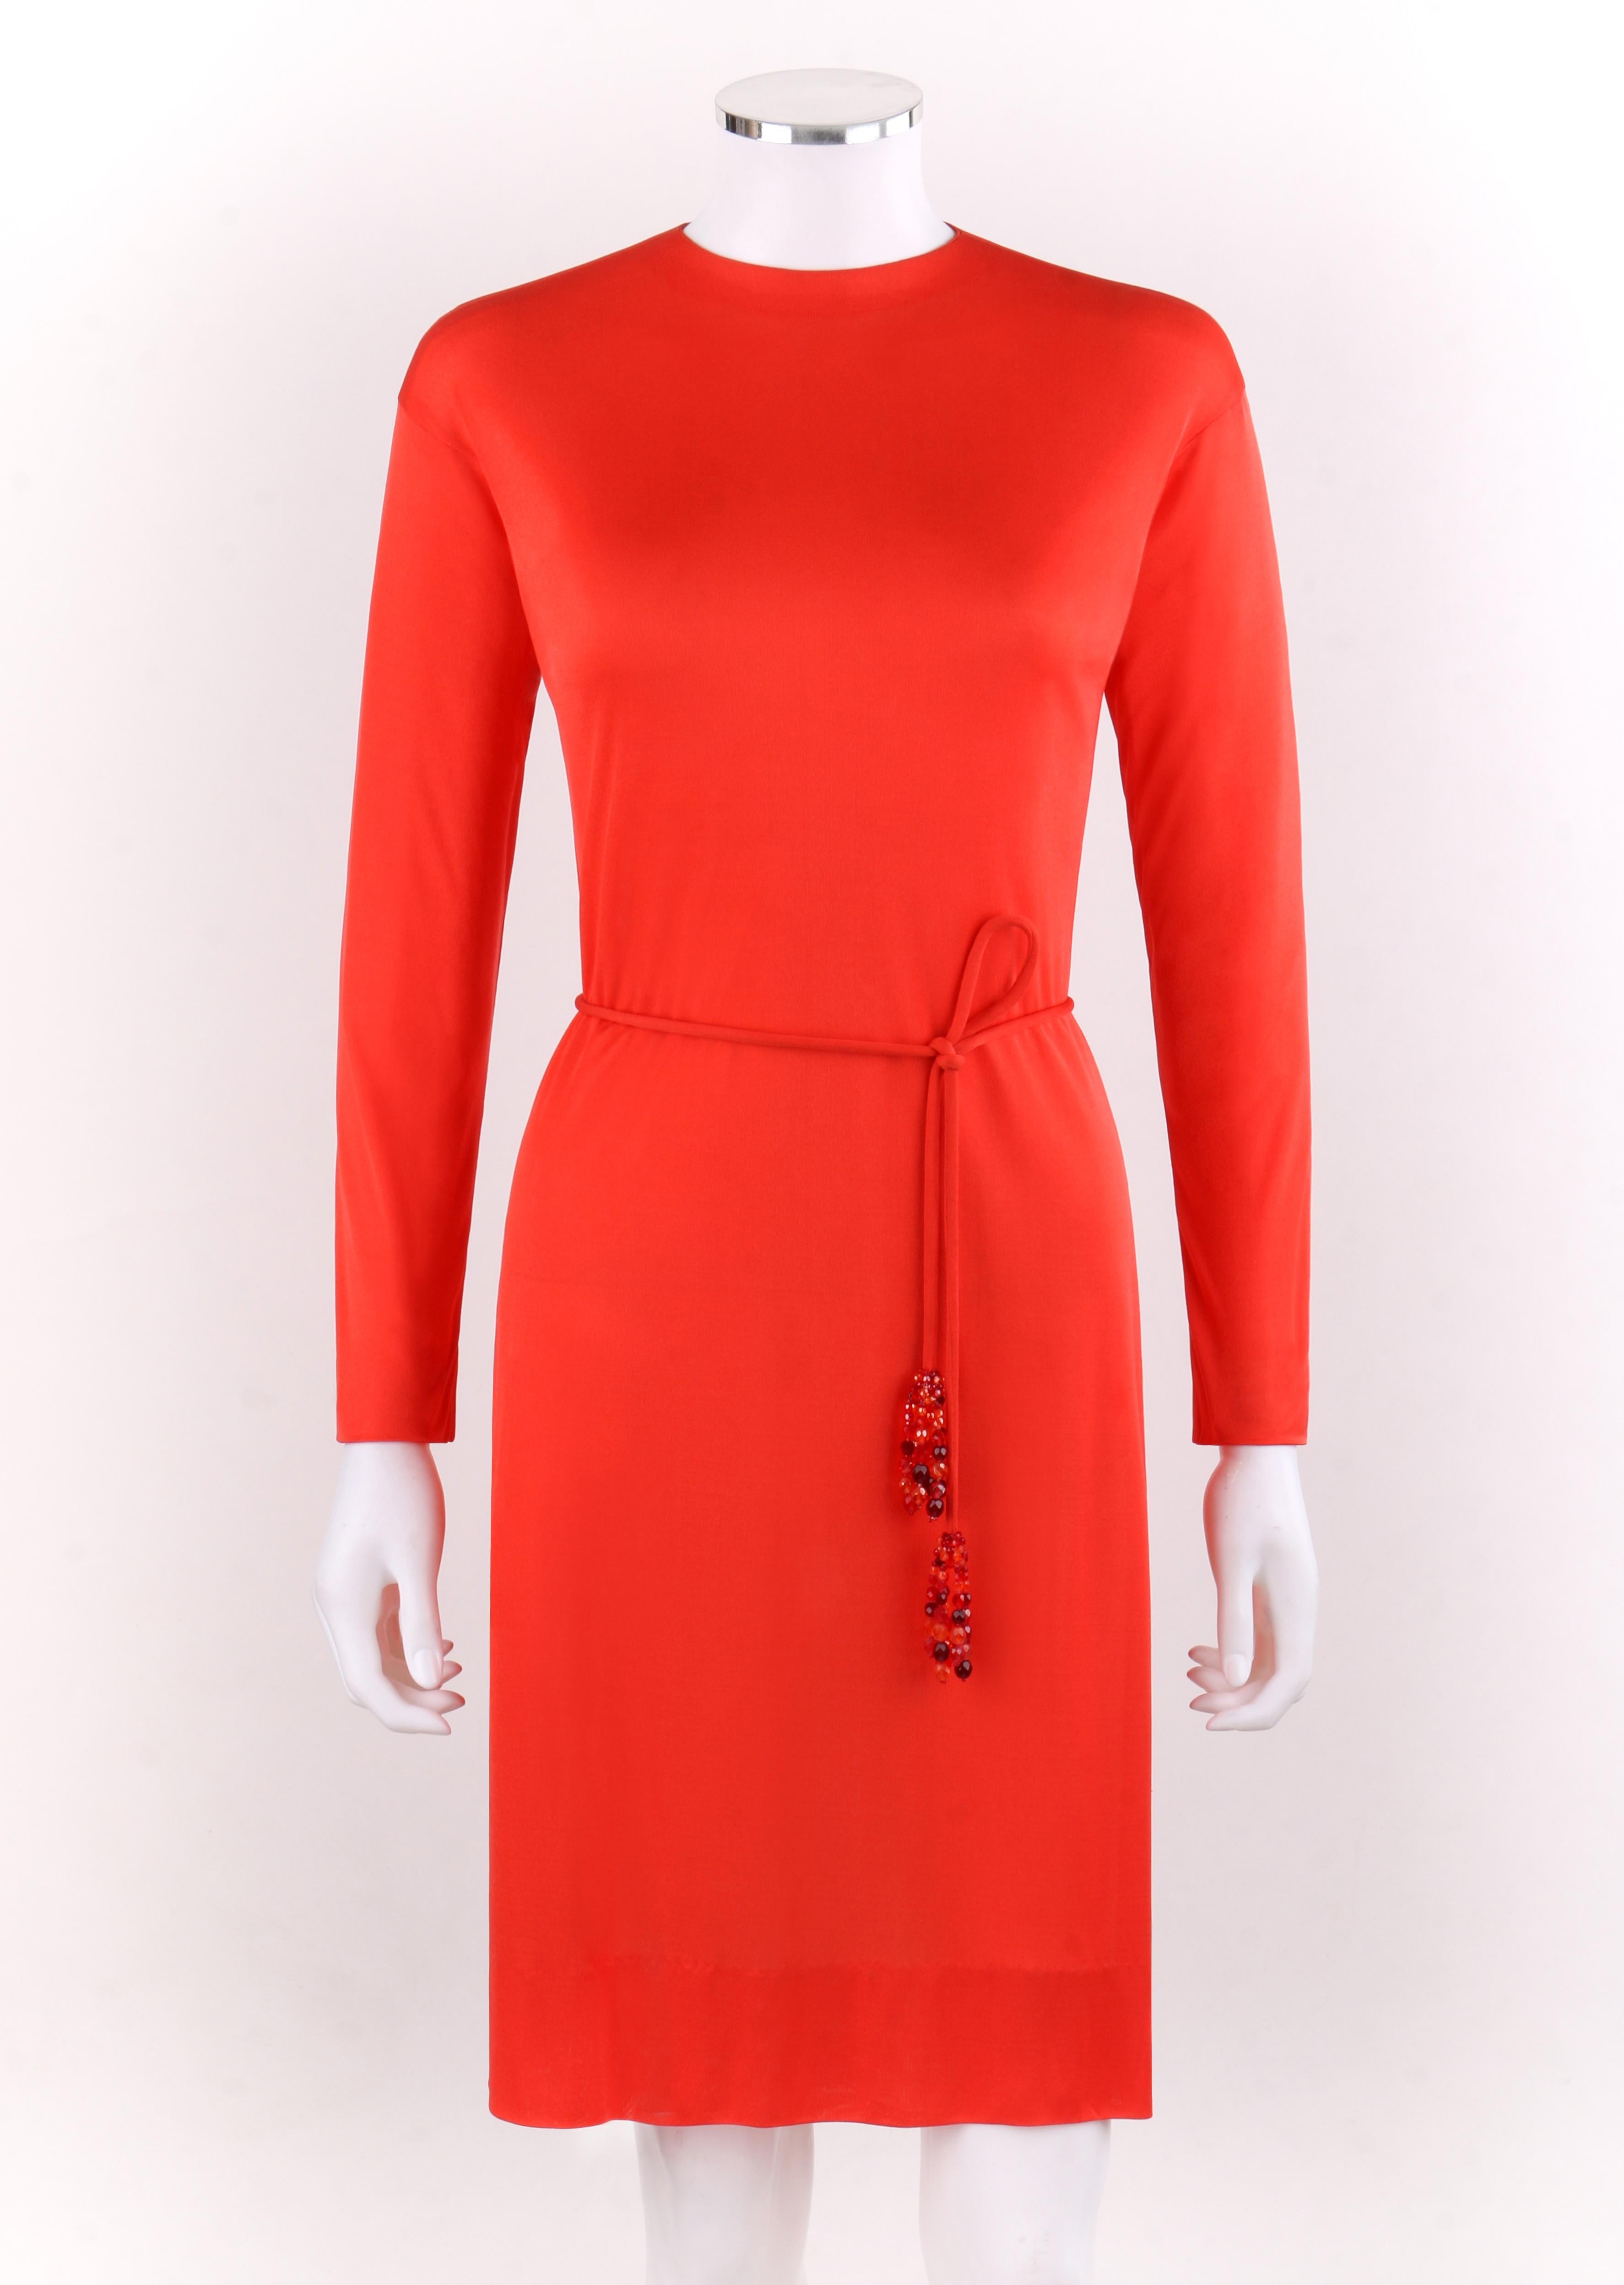 EMILIO PUCCI c.1960’s Coppola E Toppo Belted Scarlet Red Silk Jersey Dress
 
Circa: 1960’s 
Label(s): Emilio Pucci / Exclusively for Neiman Marcus  
Style: Sheath dress
Color(s): Red / Orange
Lined: No
Marked Fabric Content: 100% Silk 
Additional